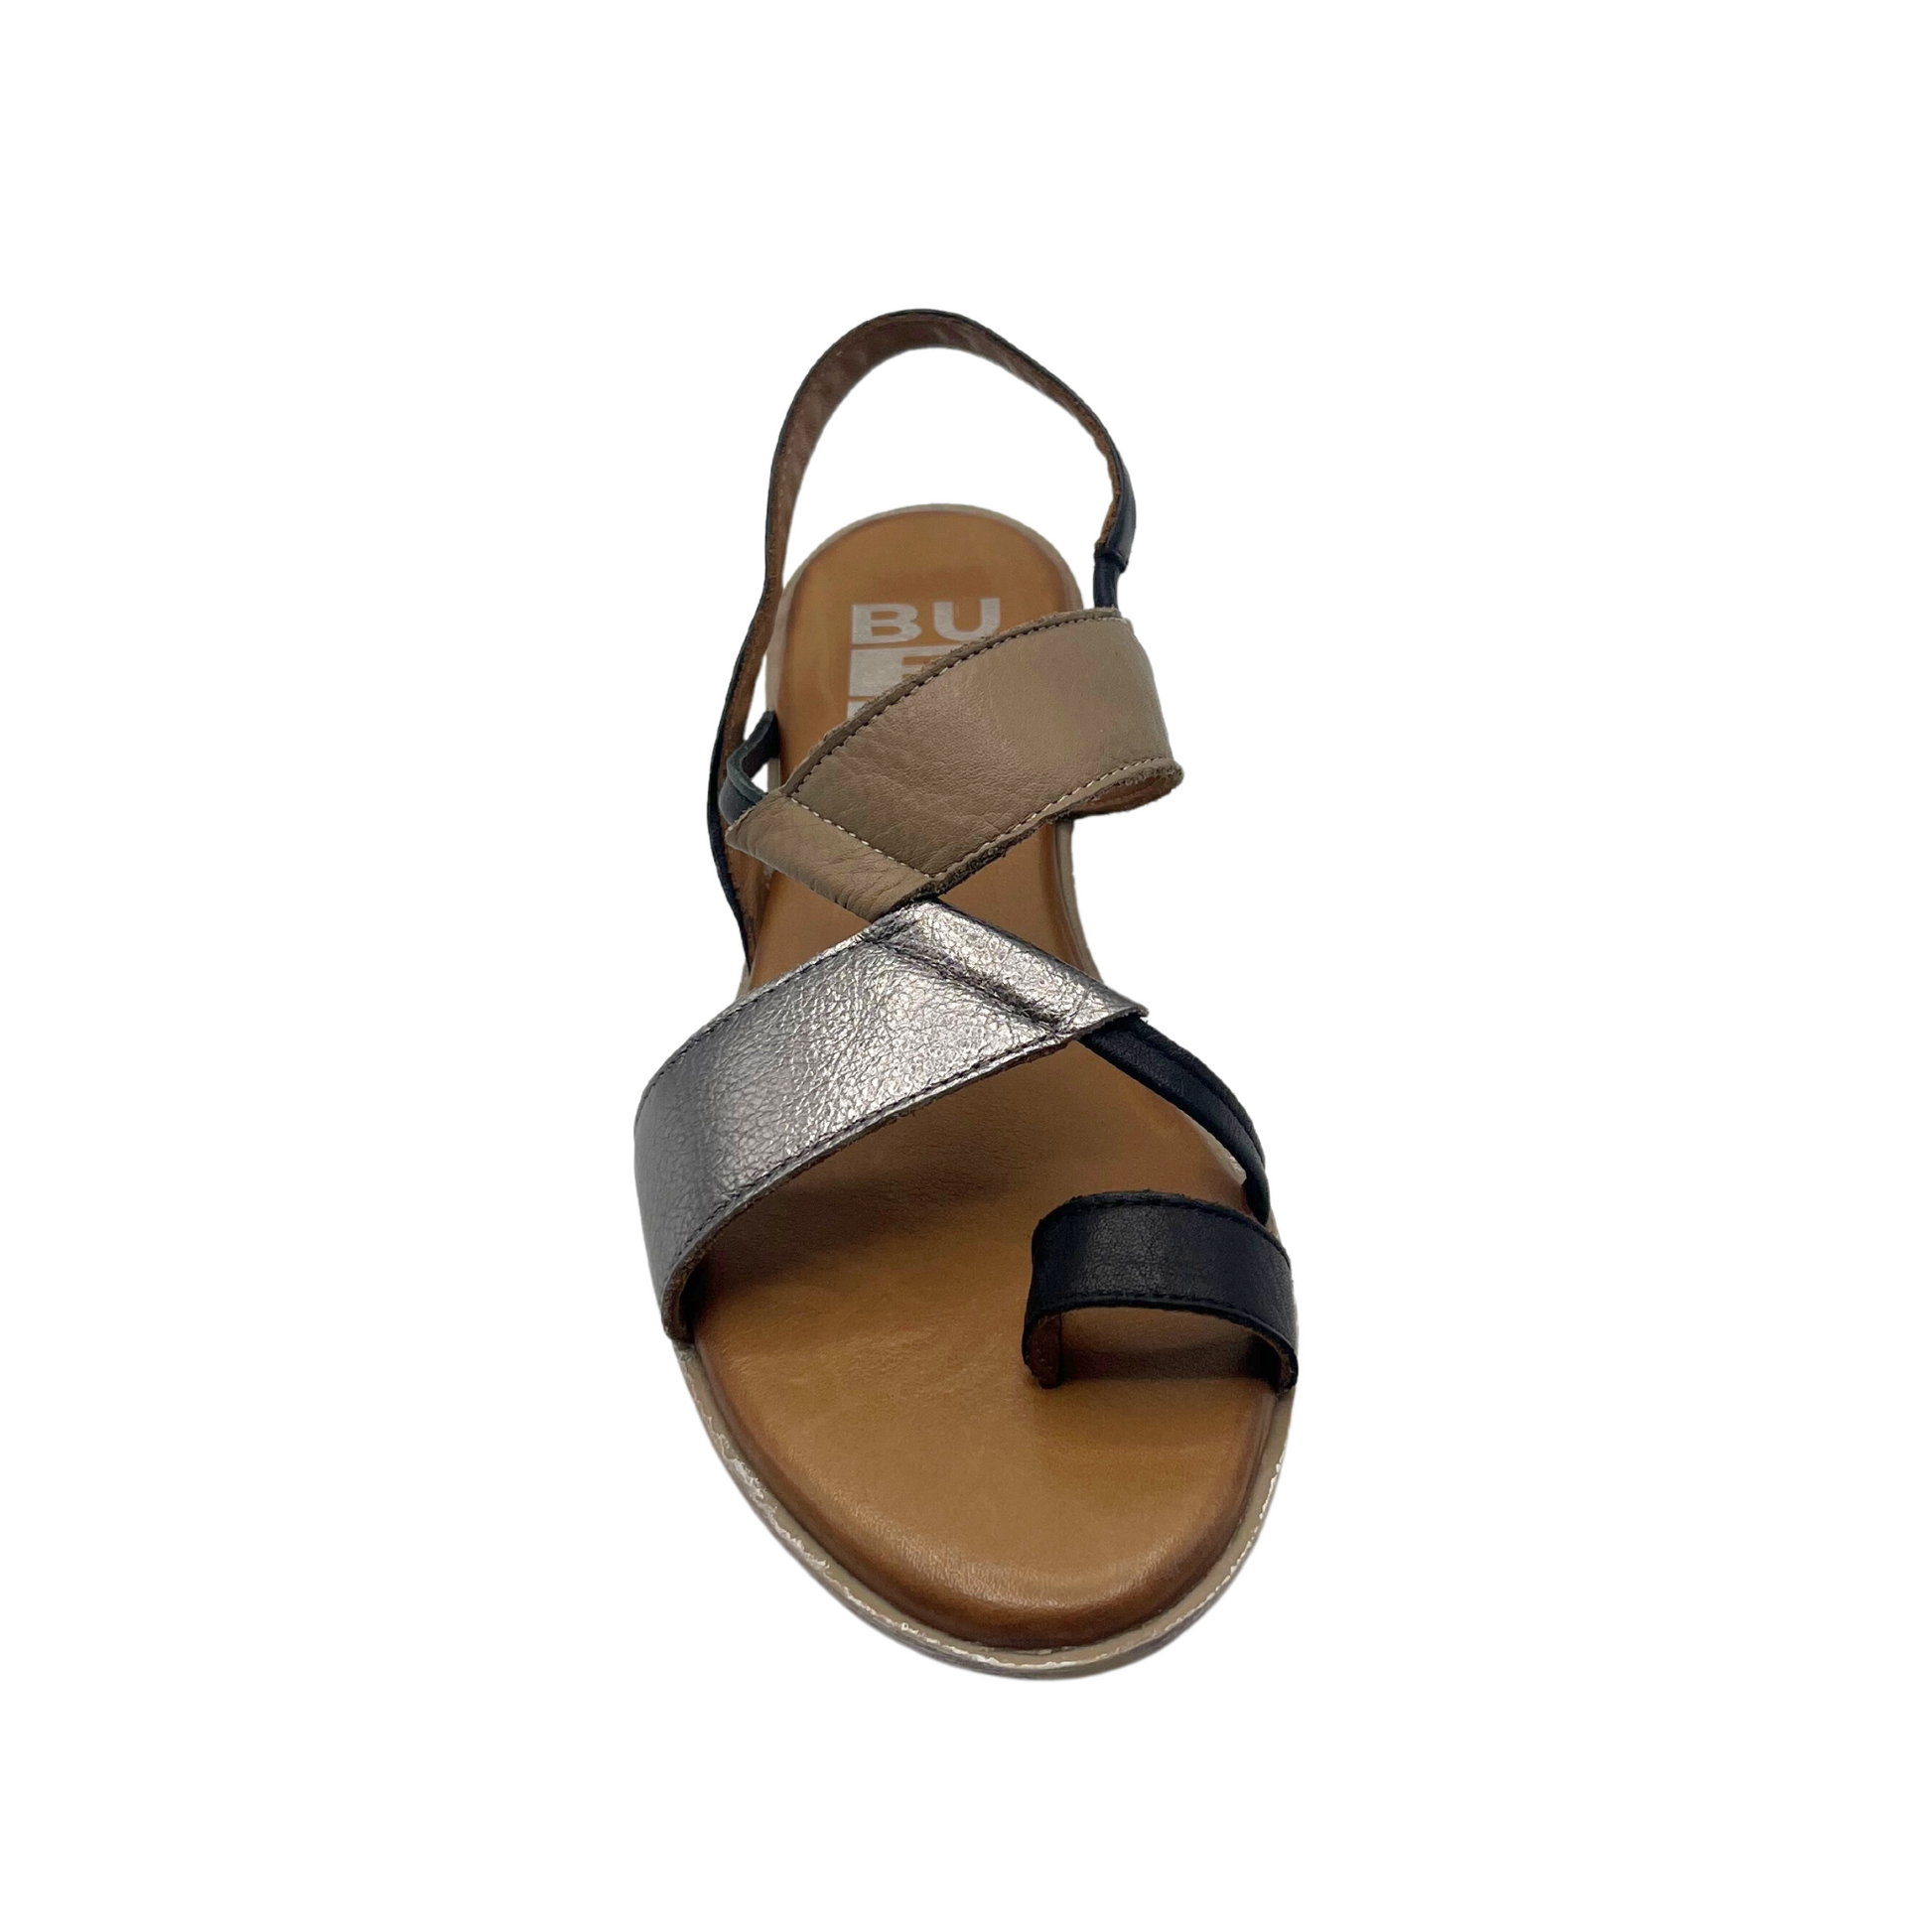 Top down view of a flat sandal with a toe loop and heel strap. Shown in a combo of black, silver and tan